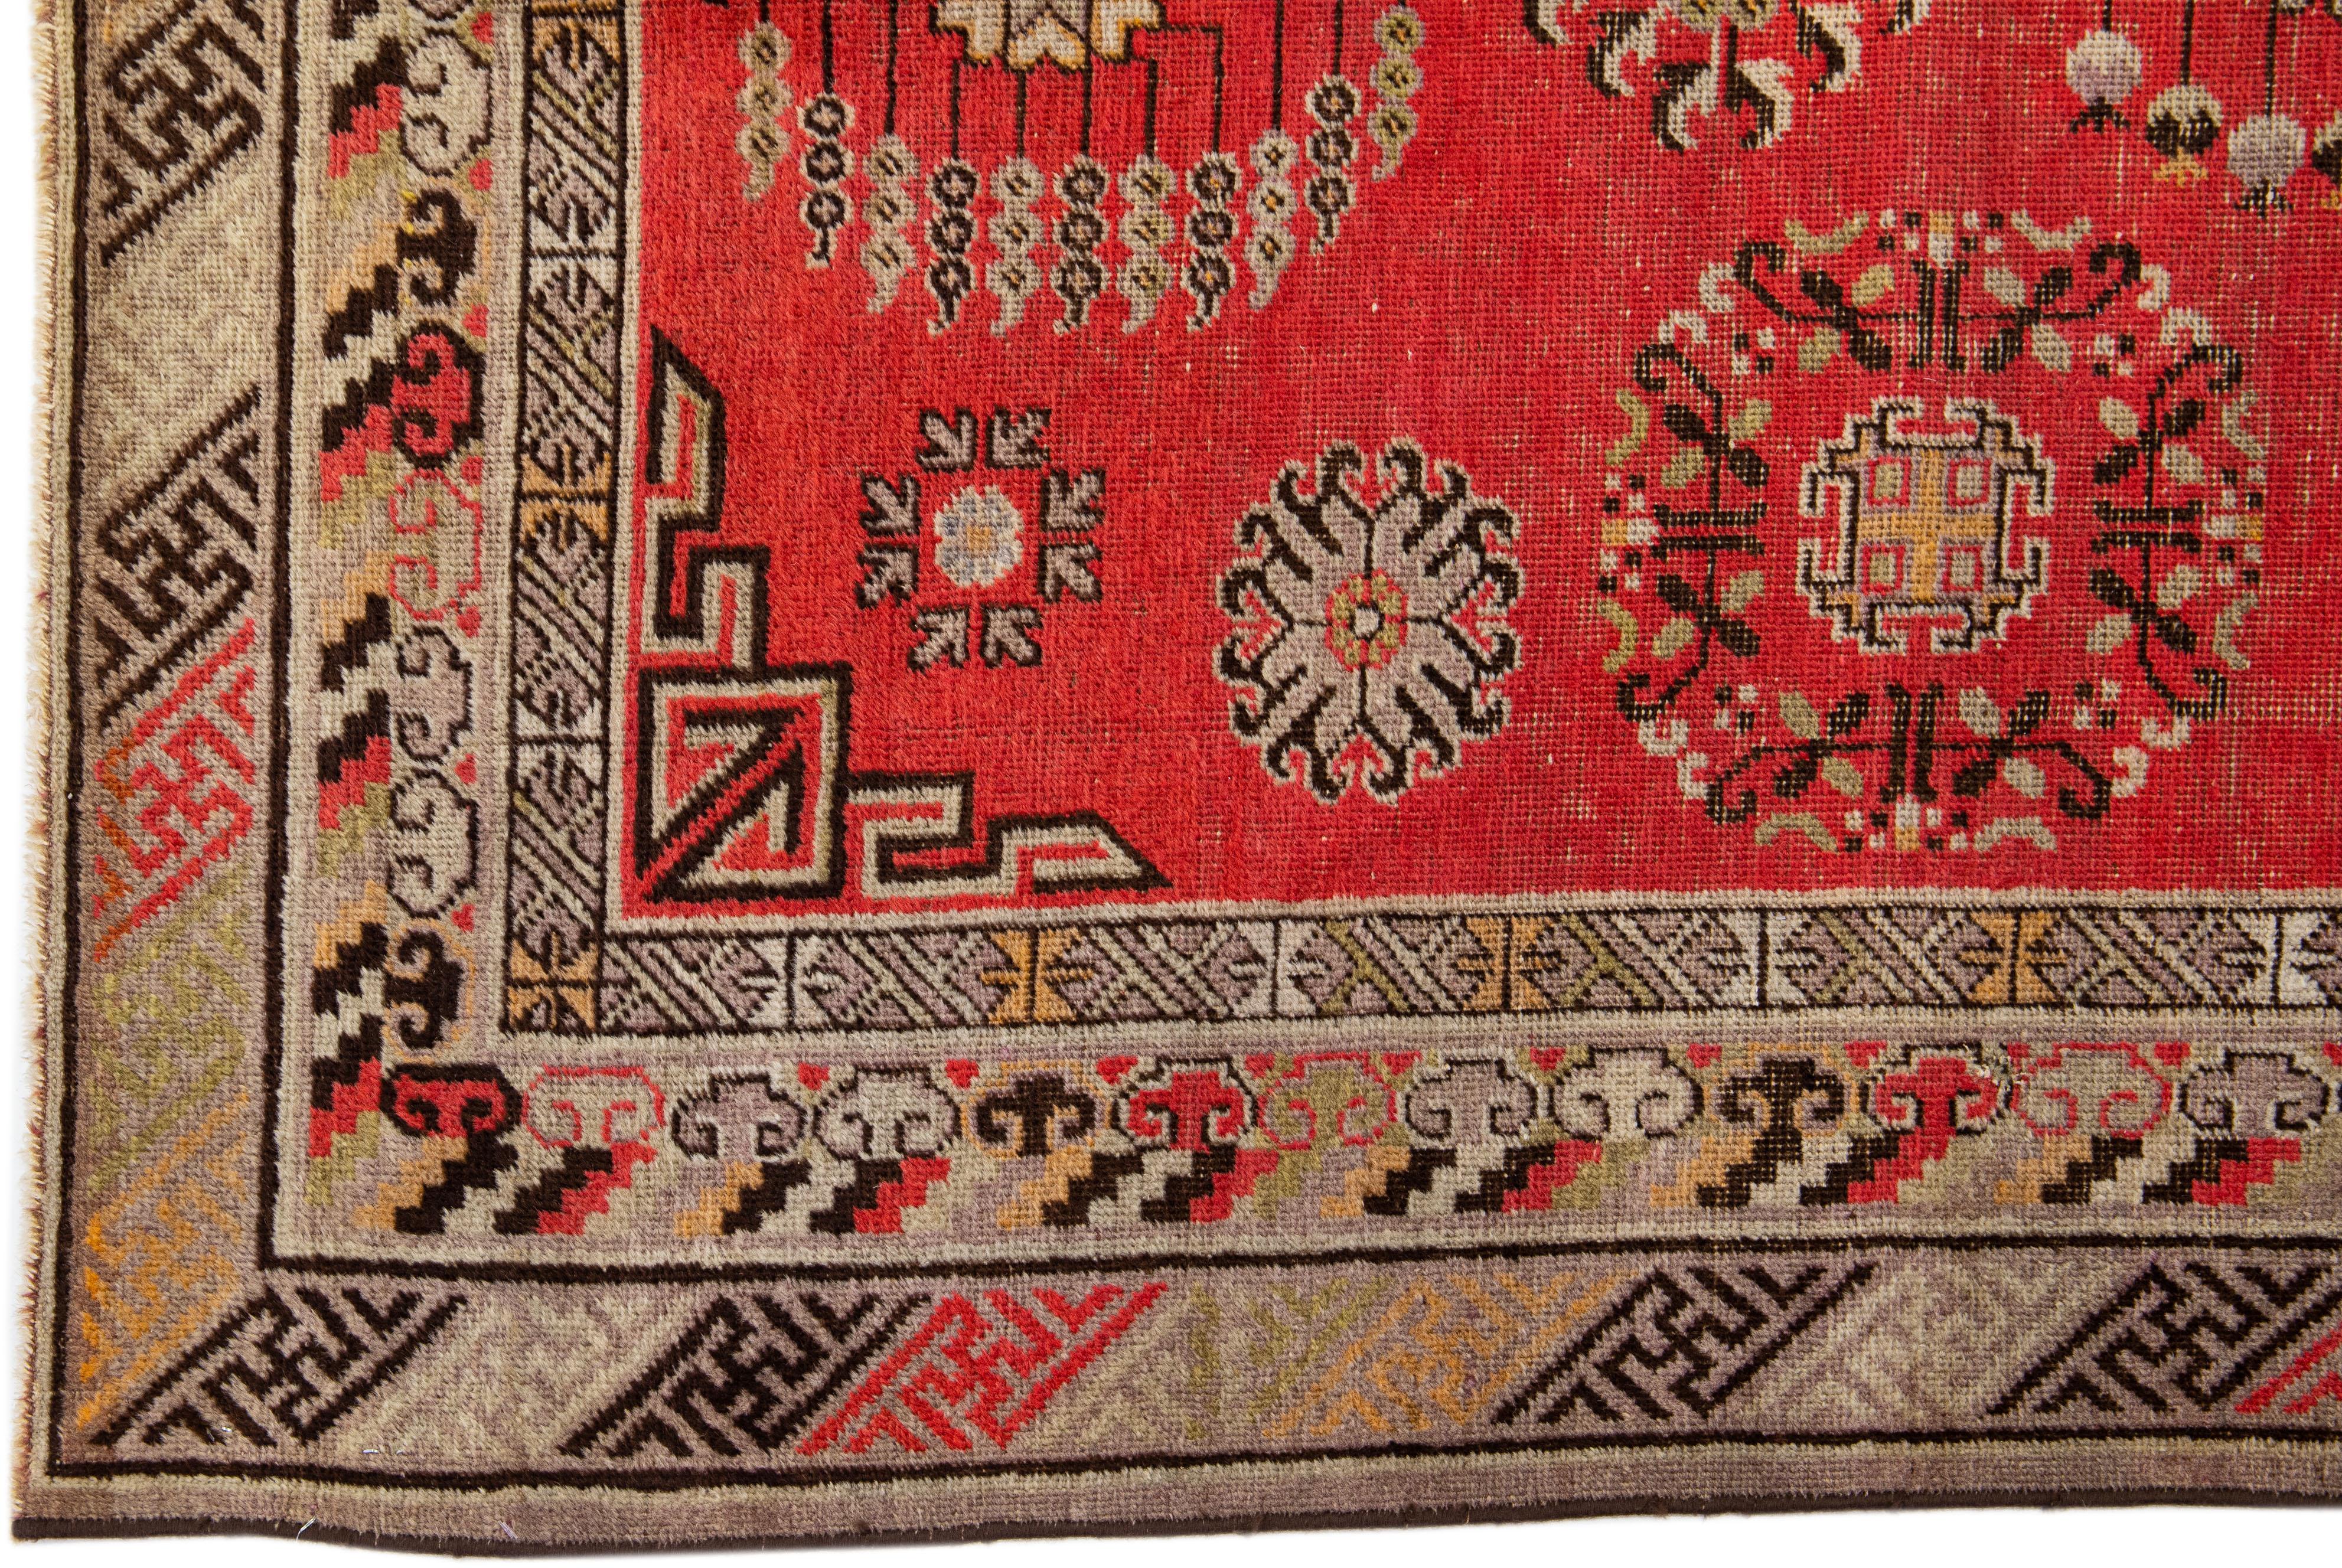 Allover Vintage Khotan Wool Rug Handmade in Red In Good Condition For Sale In Norwalk, CT